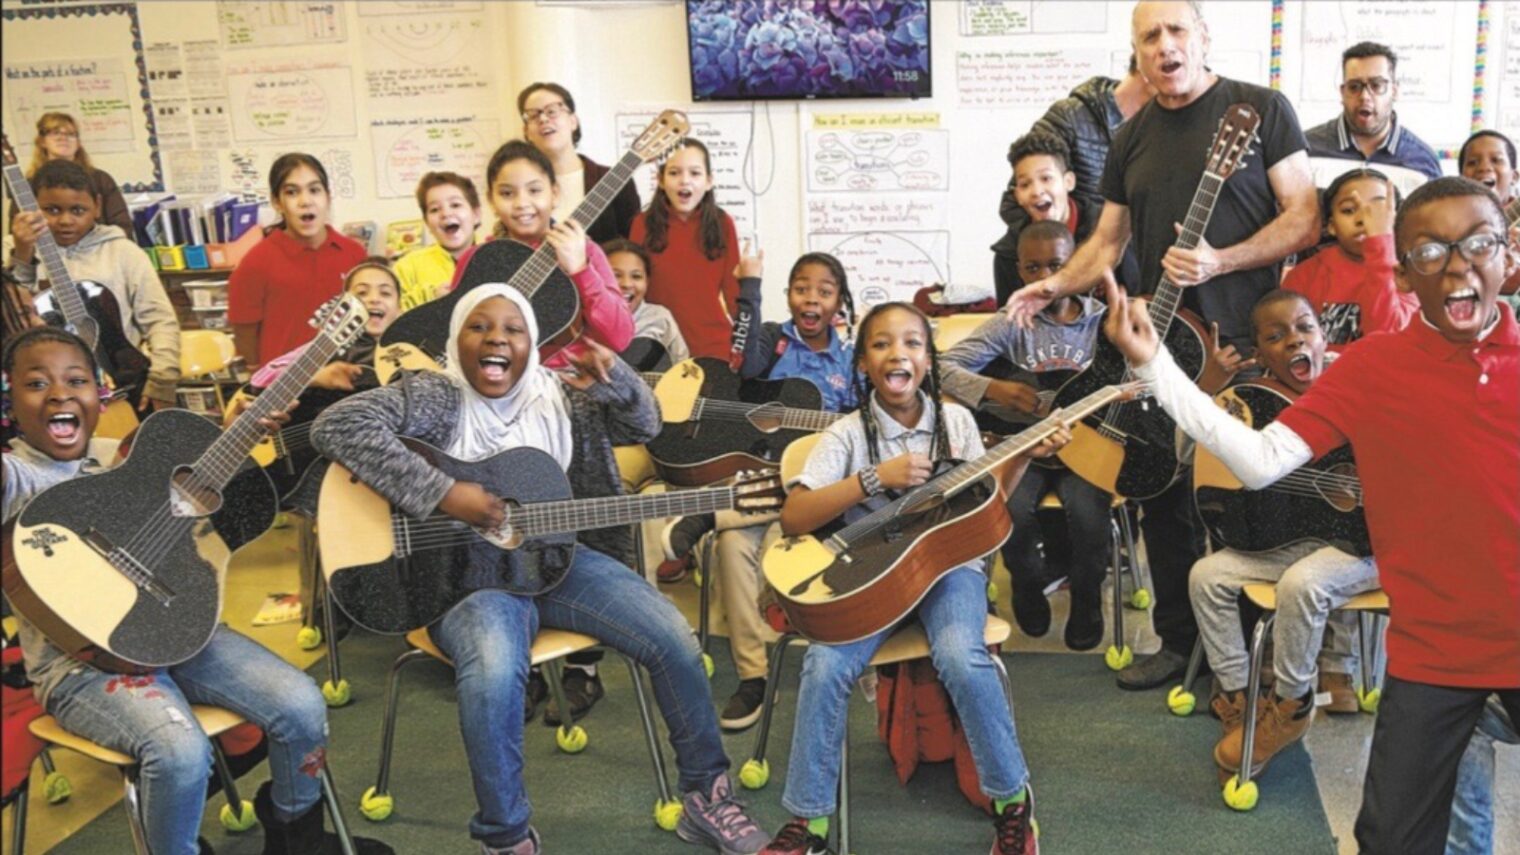 David Broza giving guitars to pupils in a charter school in the Bronx, New York. Photo courtesy of One Million Guitars